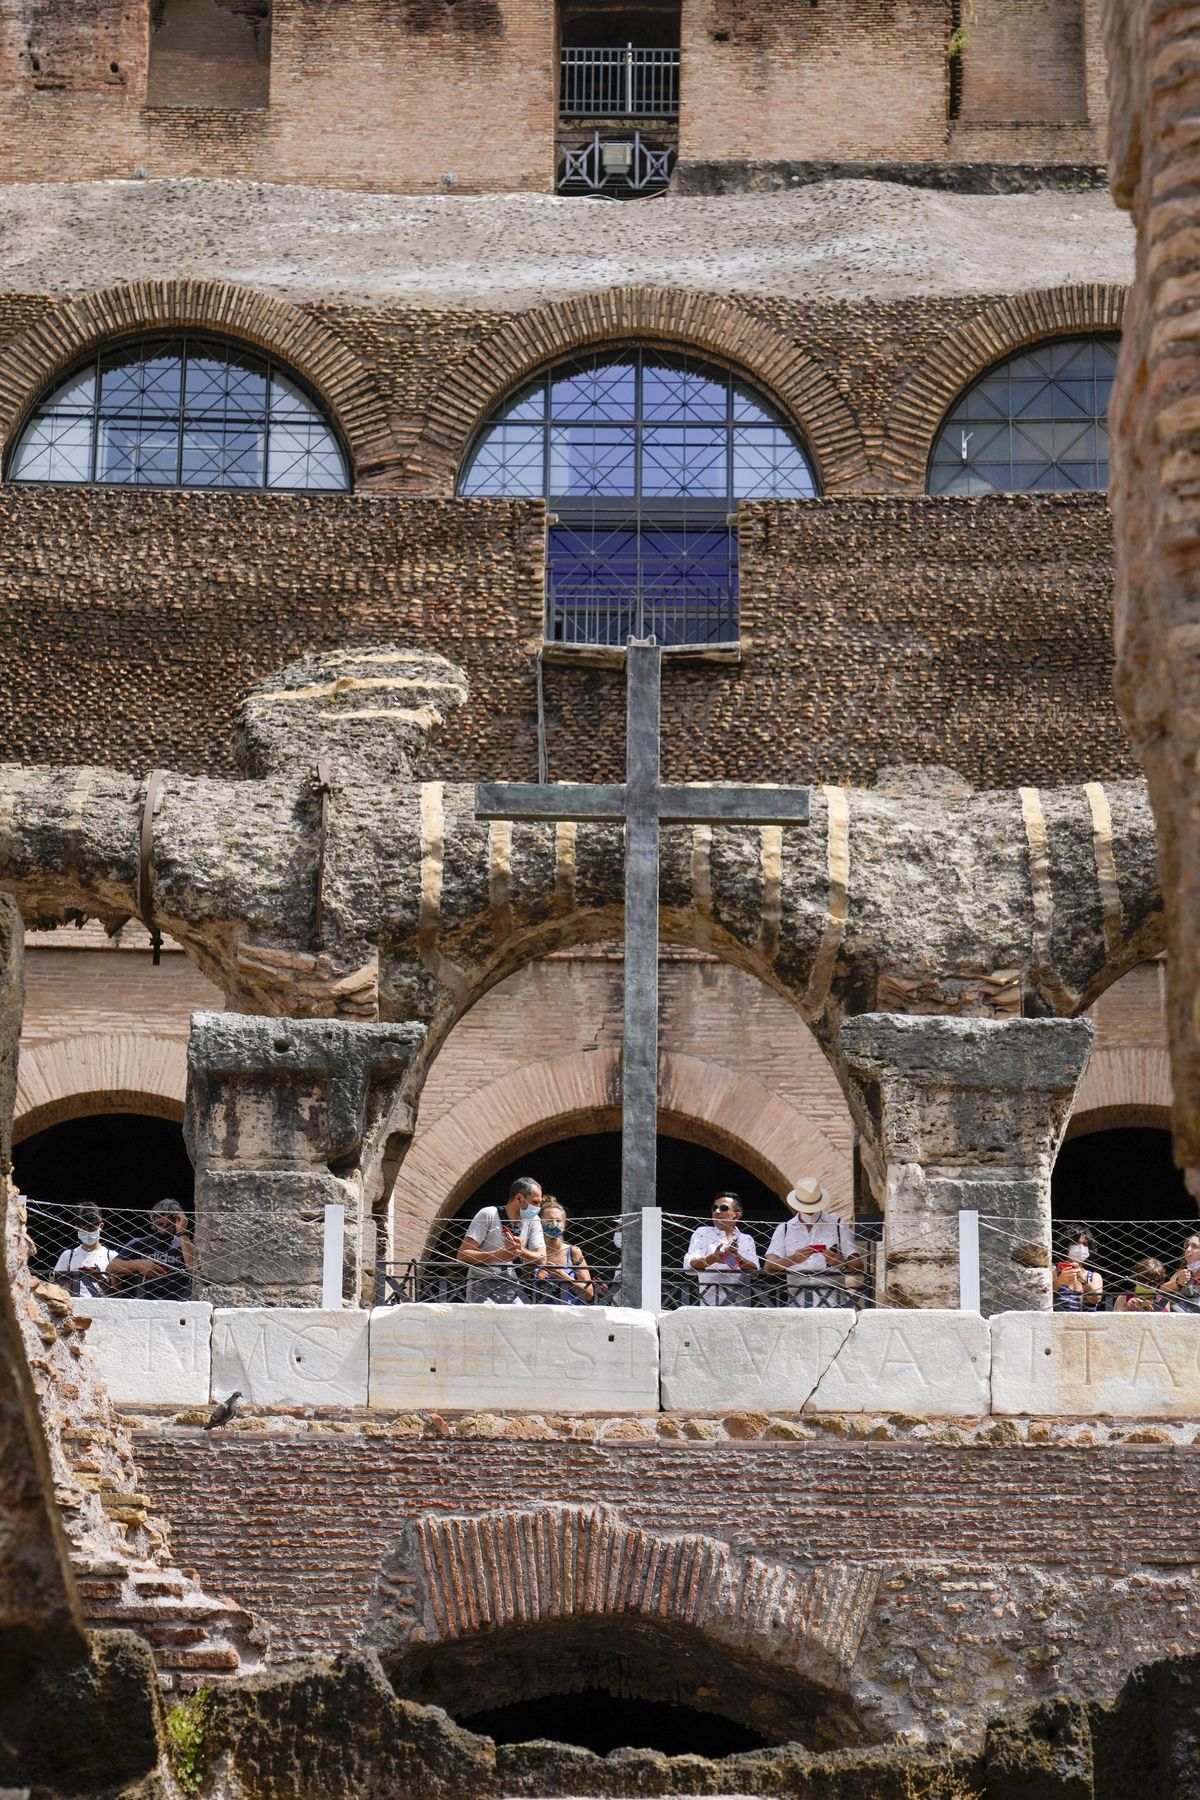 Visitors admire the newly restored lower level of the Colosseum during an event for the media, in Rome, Friday, June 25, 2021. After 2-and-1/2 years of work to shore up the Colosseum’s underground passages, tourists will be able to go down and wander through part of what what had been the ancient arena’s “backstage.”  (Andrew Medichini)